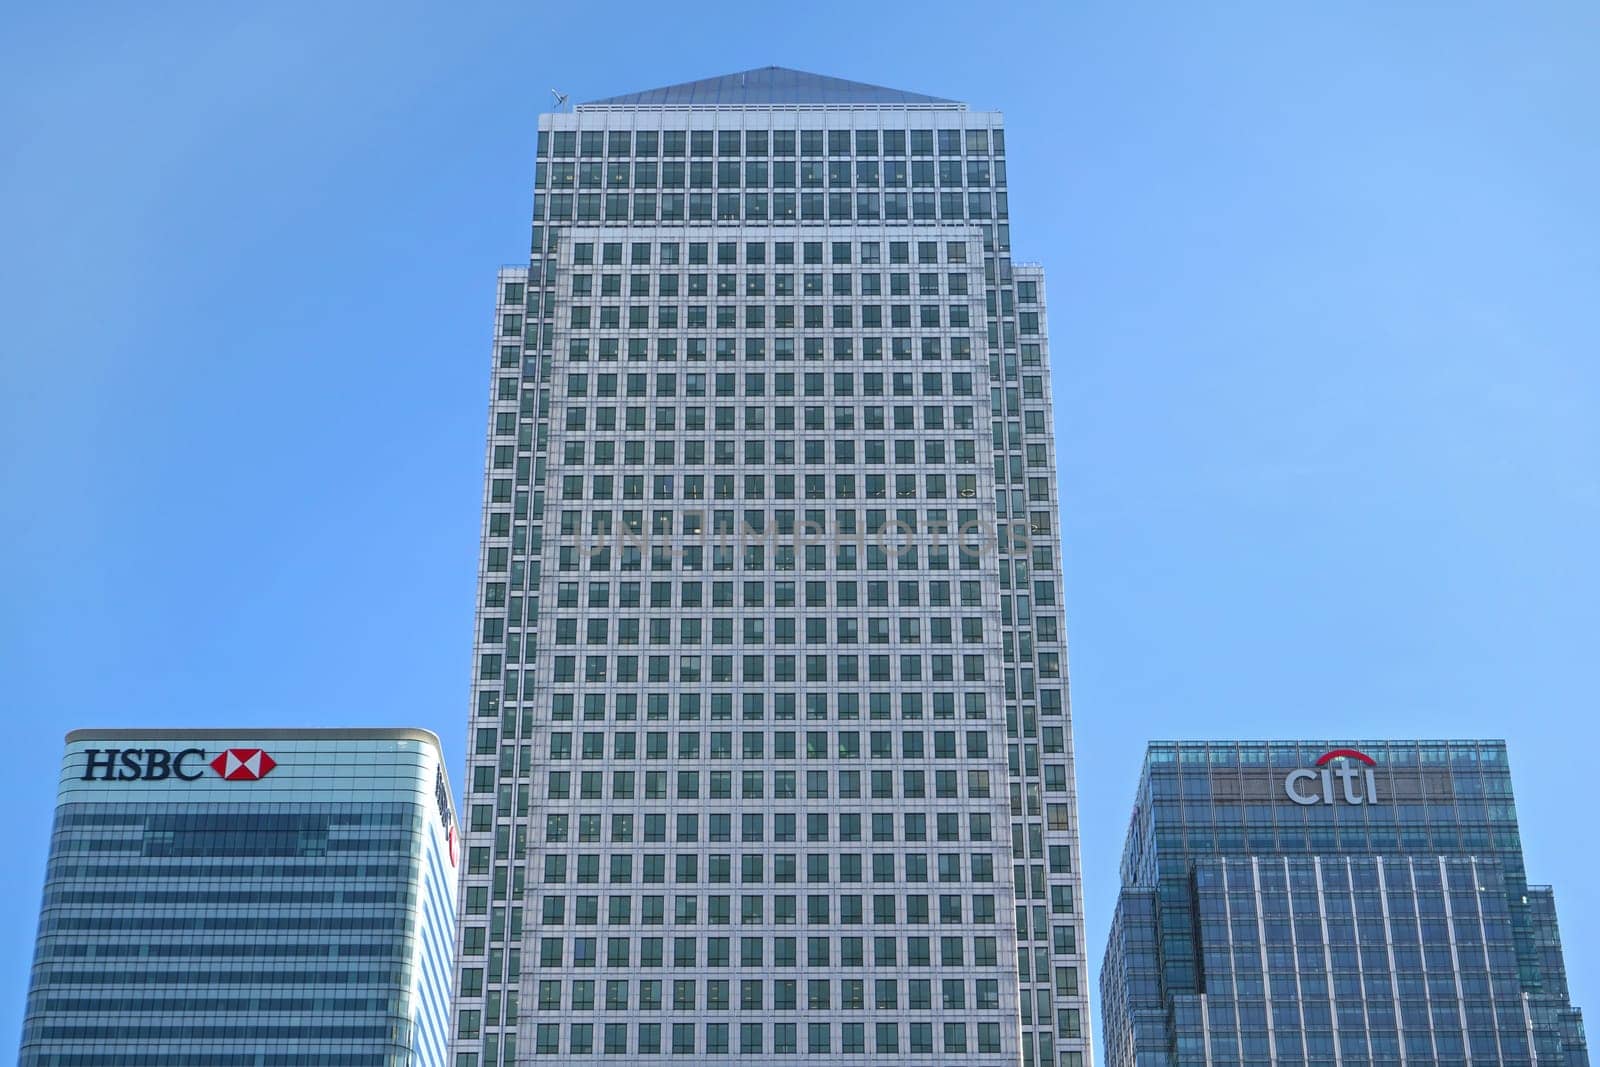 London, United Kingdom - February 03, 2019: Skyscrapers at Canary Wharf - One Canada Square building in middle, HSBC and Citi bank on sides. Many financial companies resides in this part of London